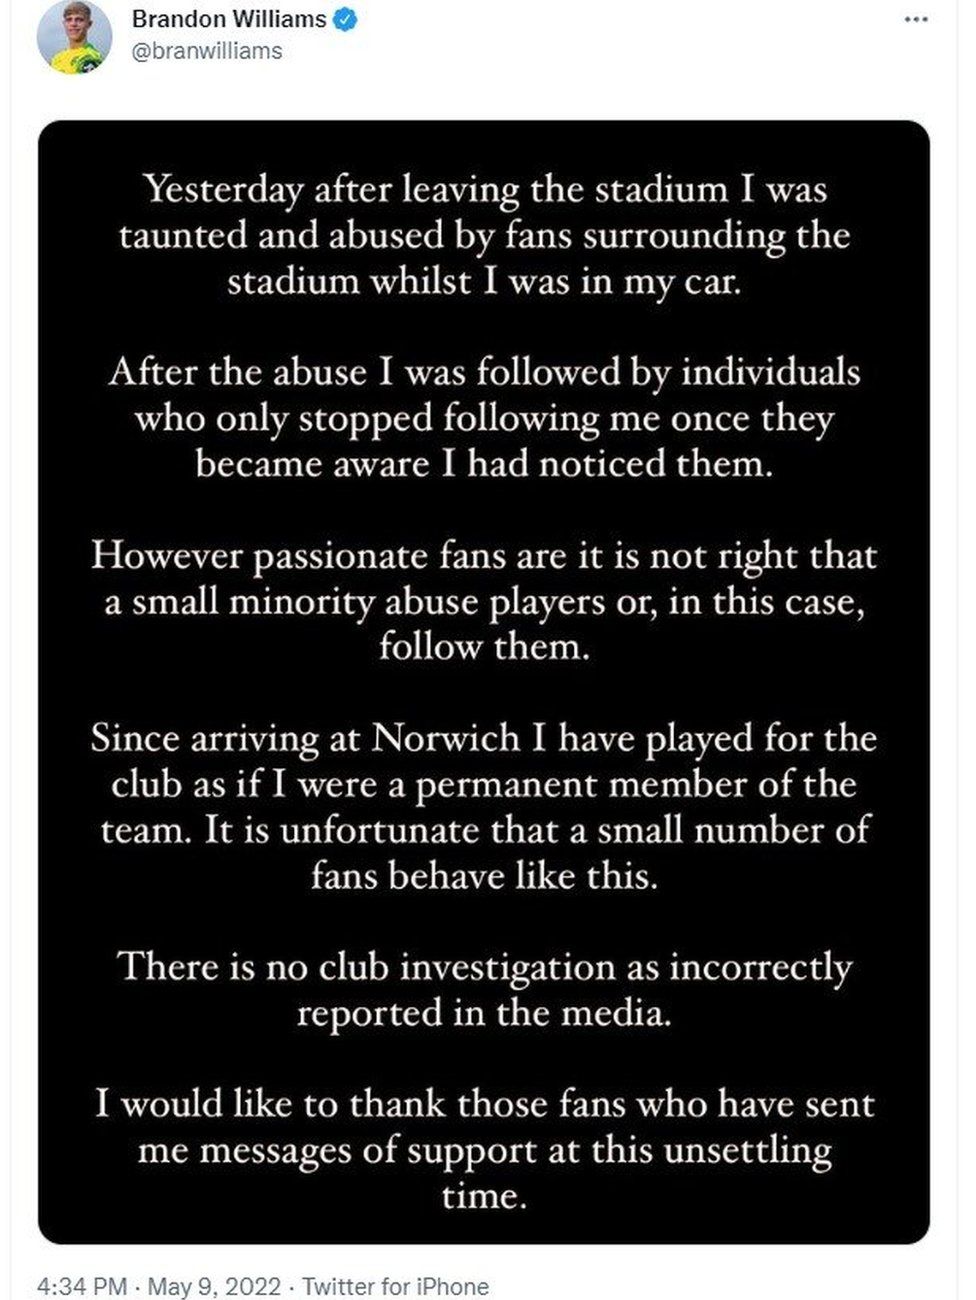 Twitter post by Brandon Williams: Yesterday after leaving the stadium I was taunted and abused by fans surrounding the stadium whilst I was in the car. After the abuse I was followed by individuals who only stopped following me once they became aware I had noticed them. However passionate fans are it is not right that a small minority abuse players or, in this case, follow them. Since arriving at Norwich I have played for the club as if I were a permanent member of the team. It's unfortunate that a small number of fans behave like this. There is no club investigation as incorrectly reported in the media. I would like to thank those fans who have sent messages of support at this unsettling time.